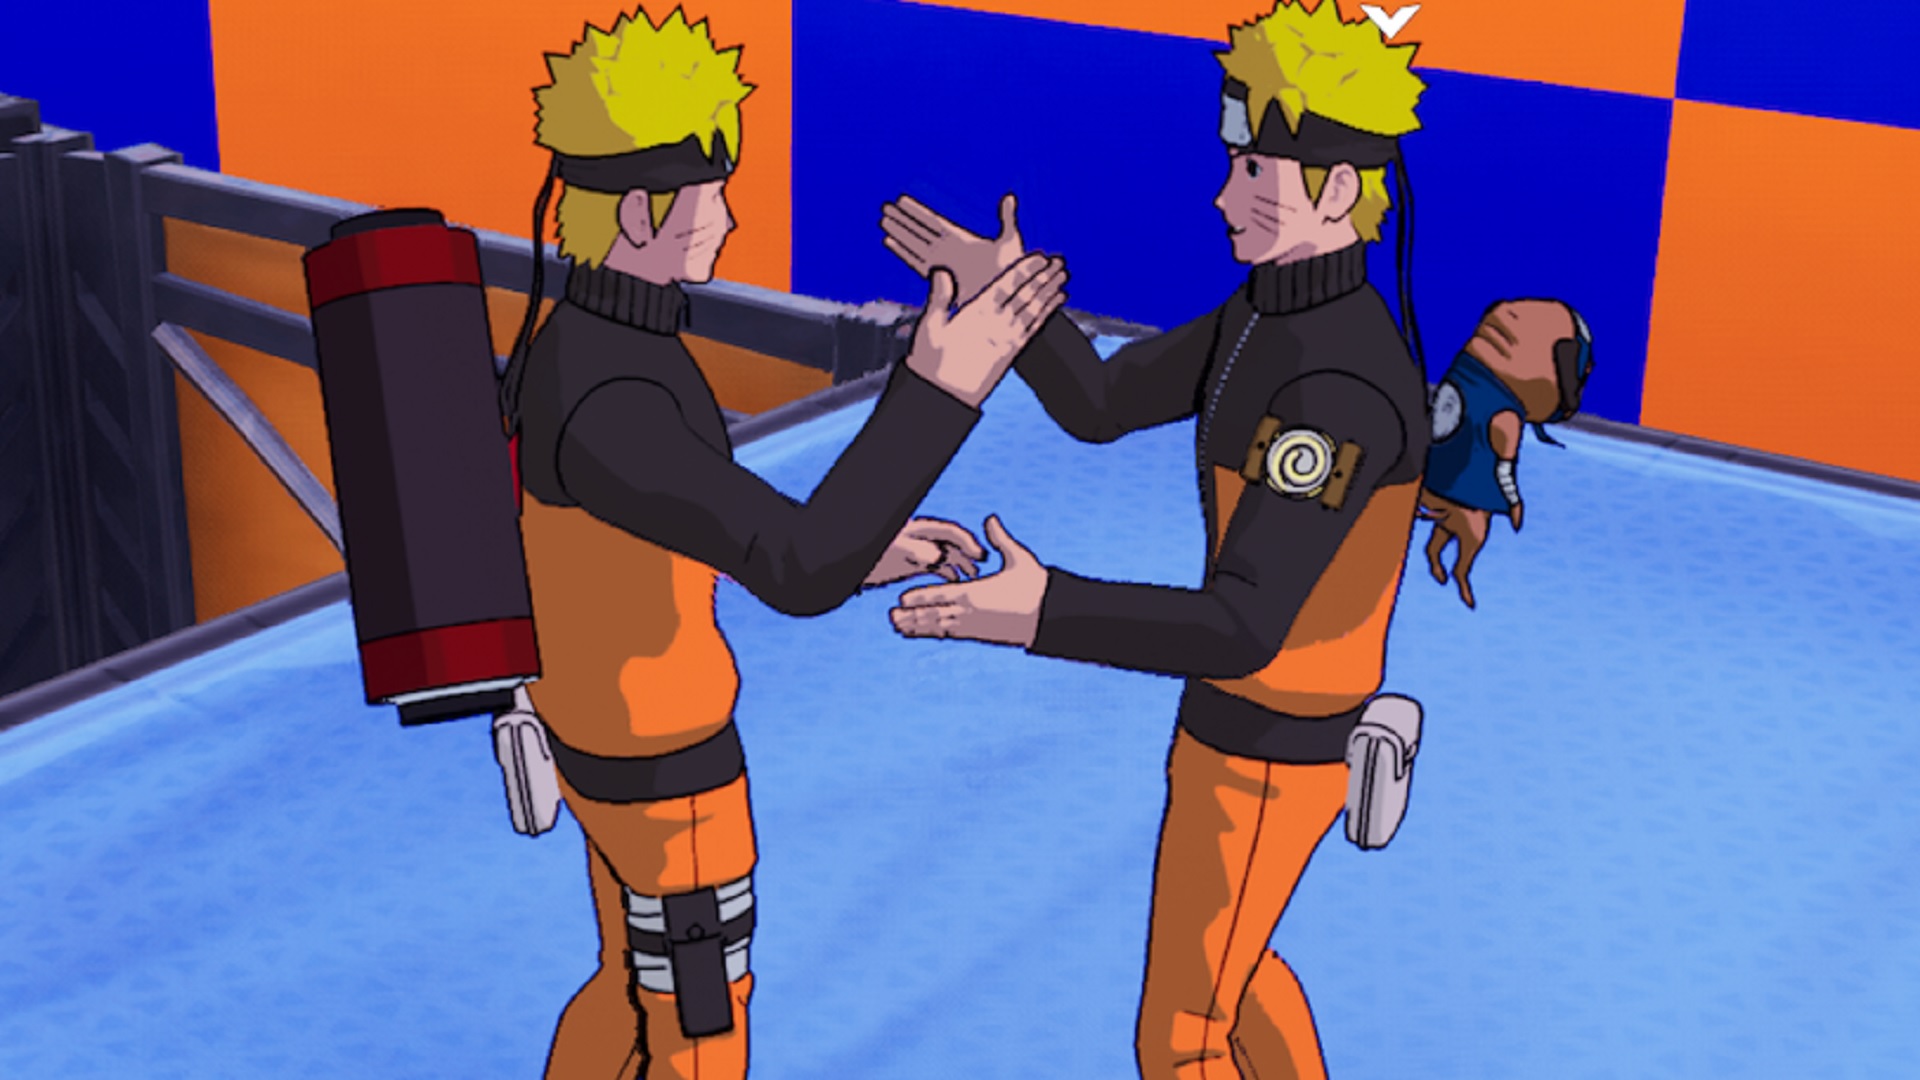 How to unlock Naruto x Fortnite skins: release date, price